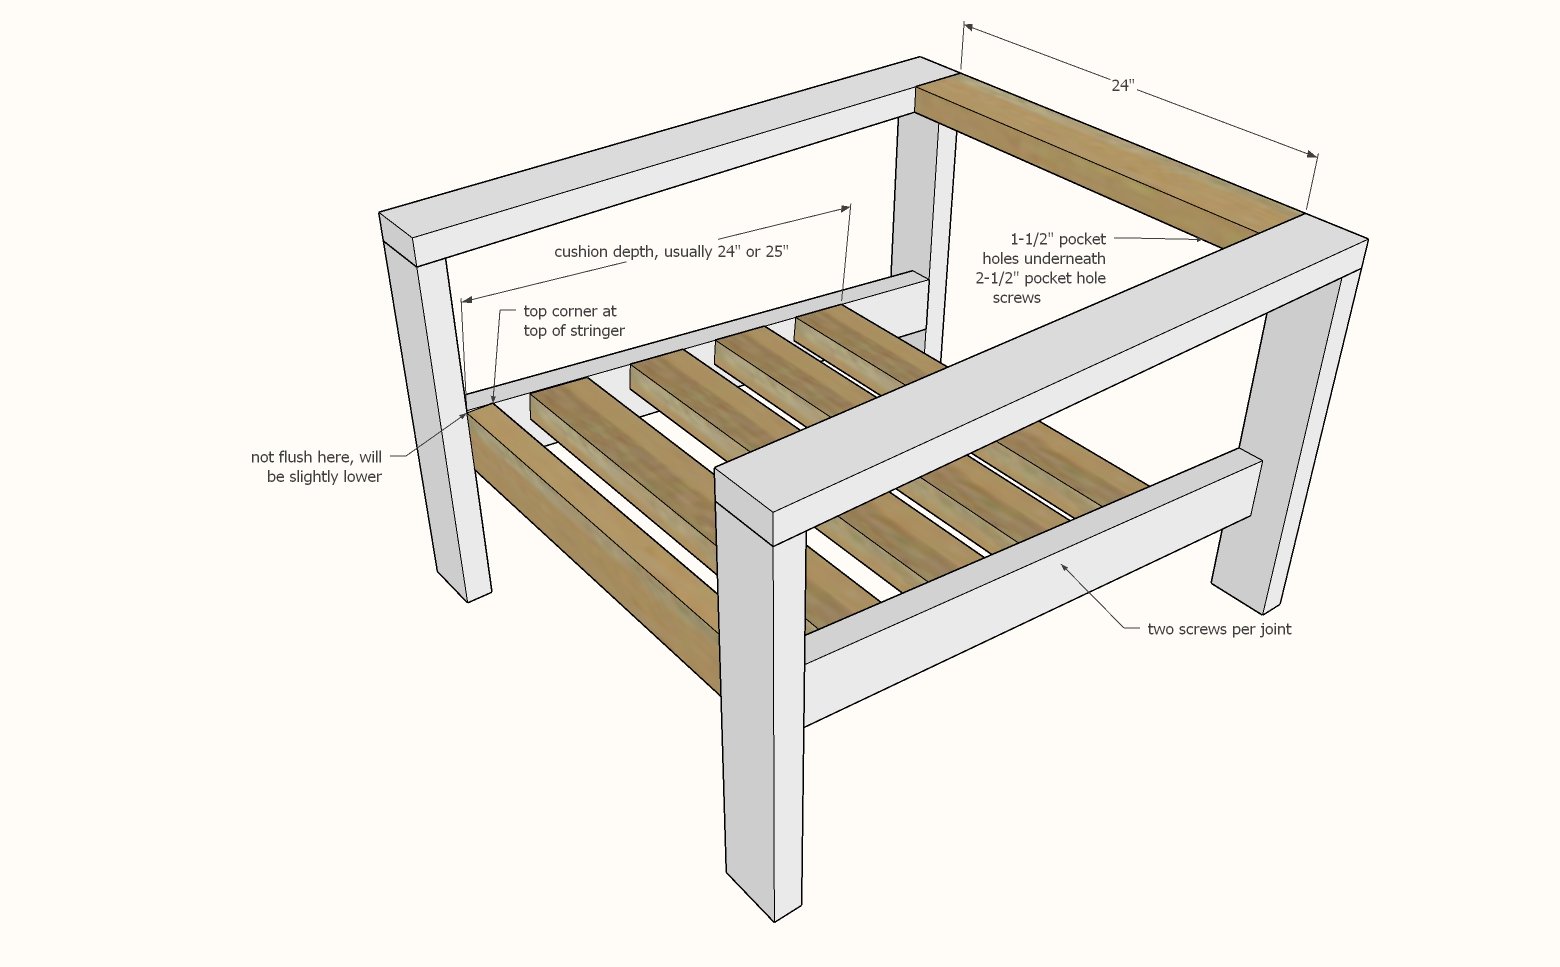 Wood Outdoor Chair for Deep Seat Cushion